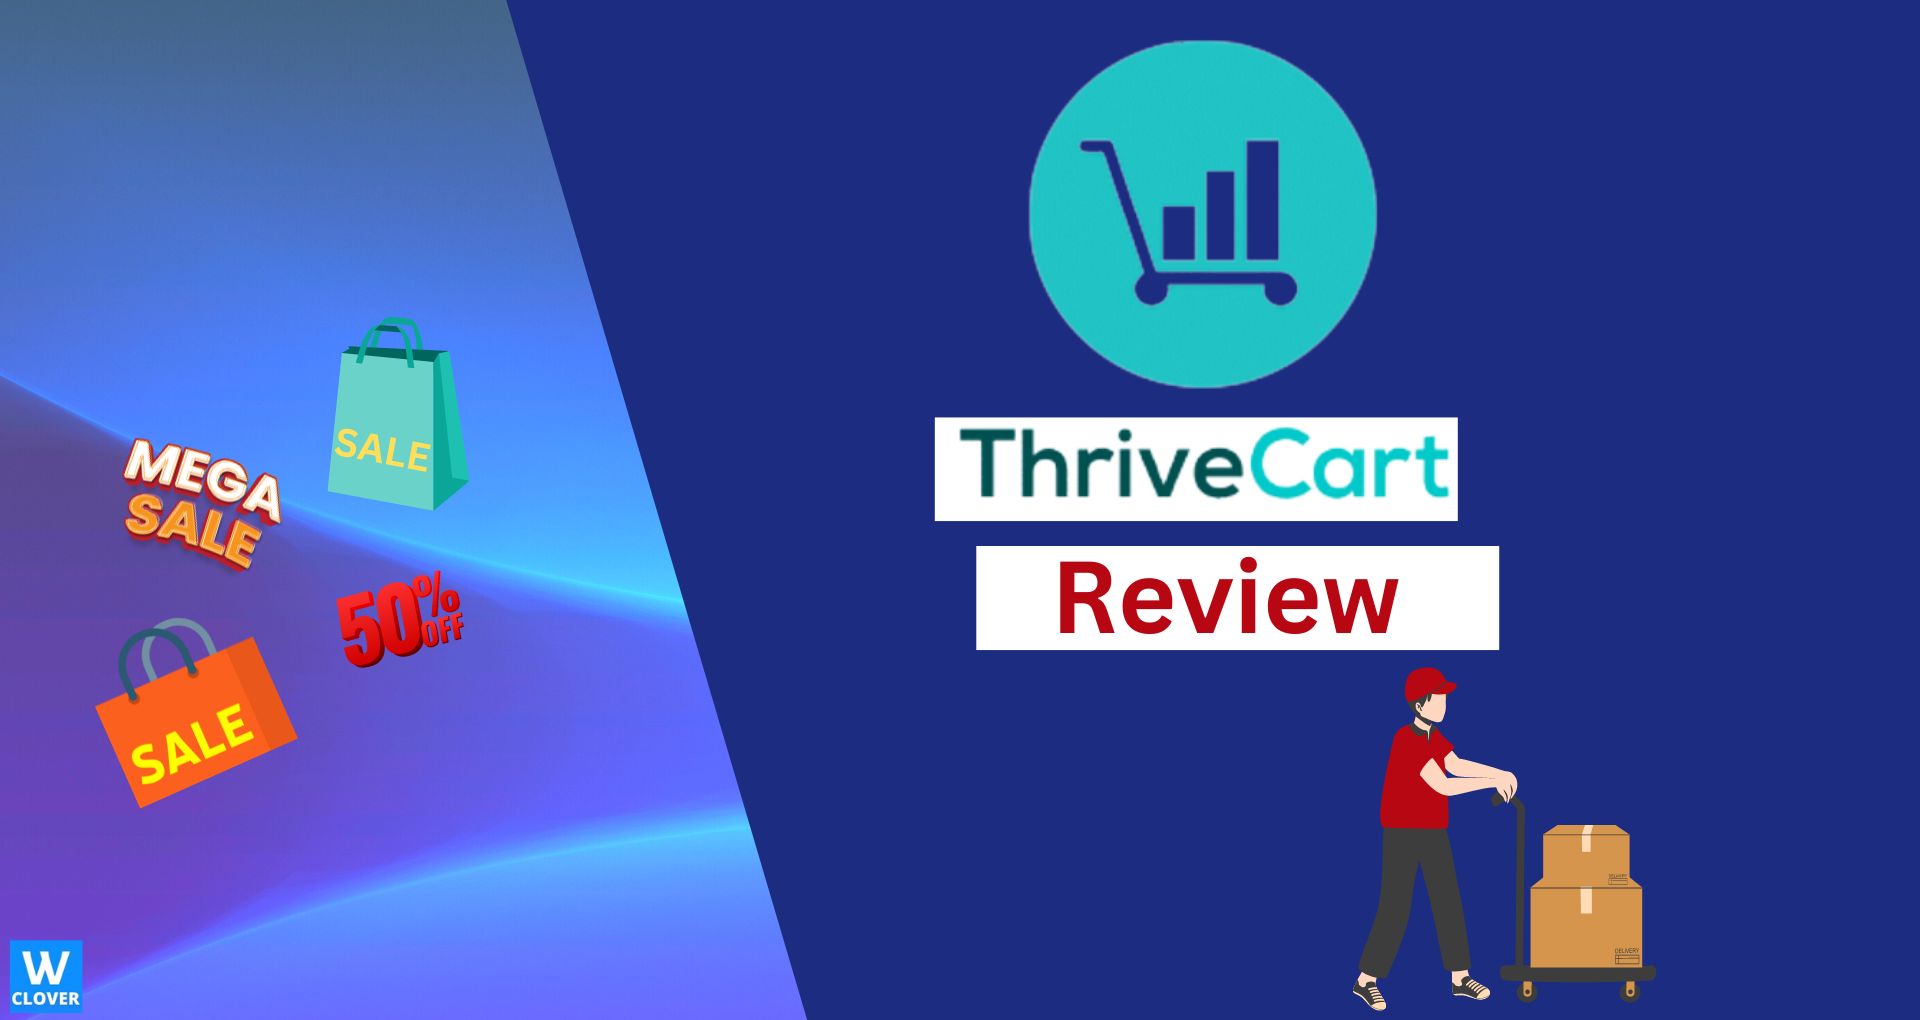 THRIVCART-REVIEW GRAPHICS OF MAN PUSHING TROLLEY WITH SALE SIGNS ON BLUE BACKGROUND